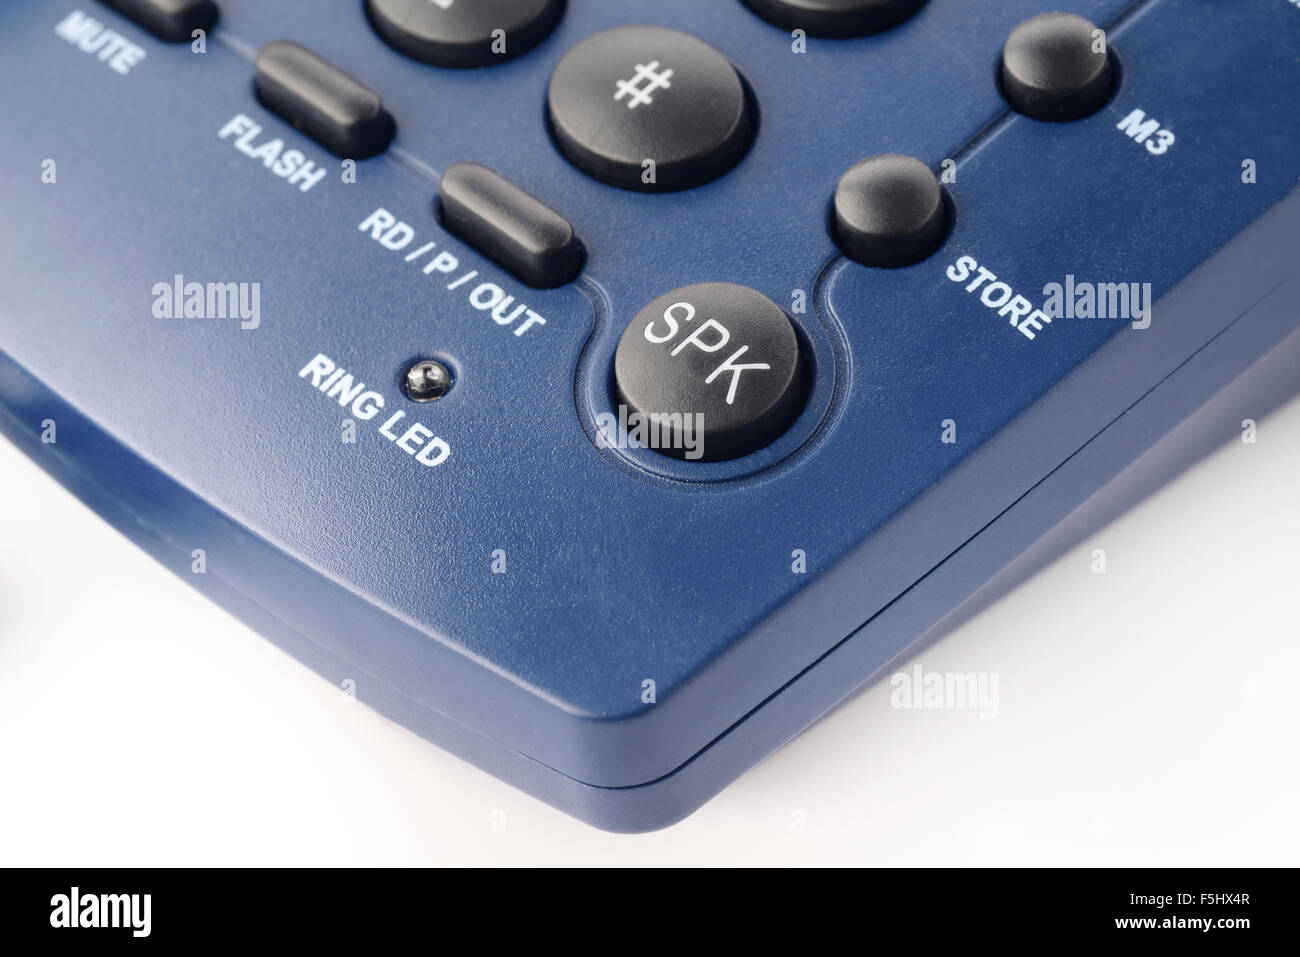 Speaker Button on Telephone for Hands free communication, Stock Photo